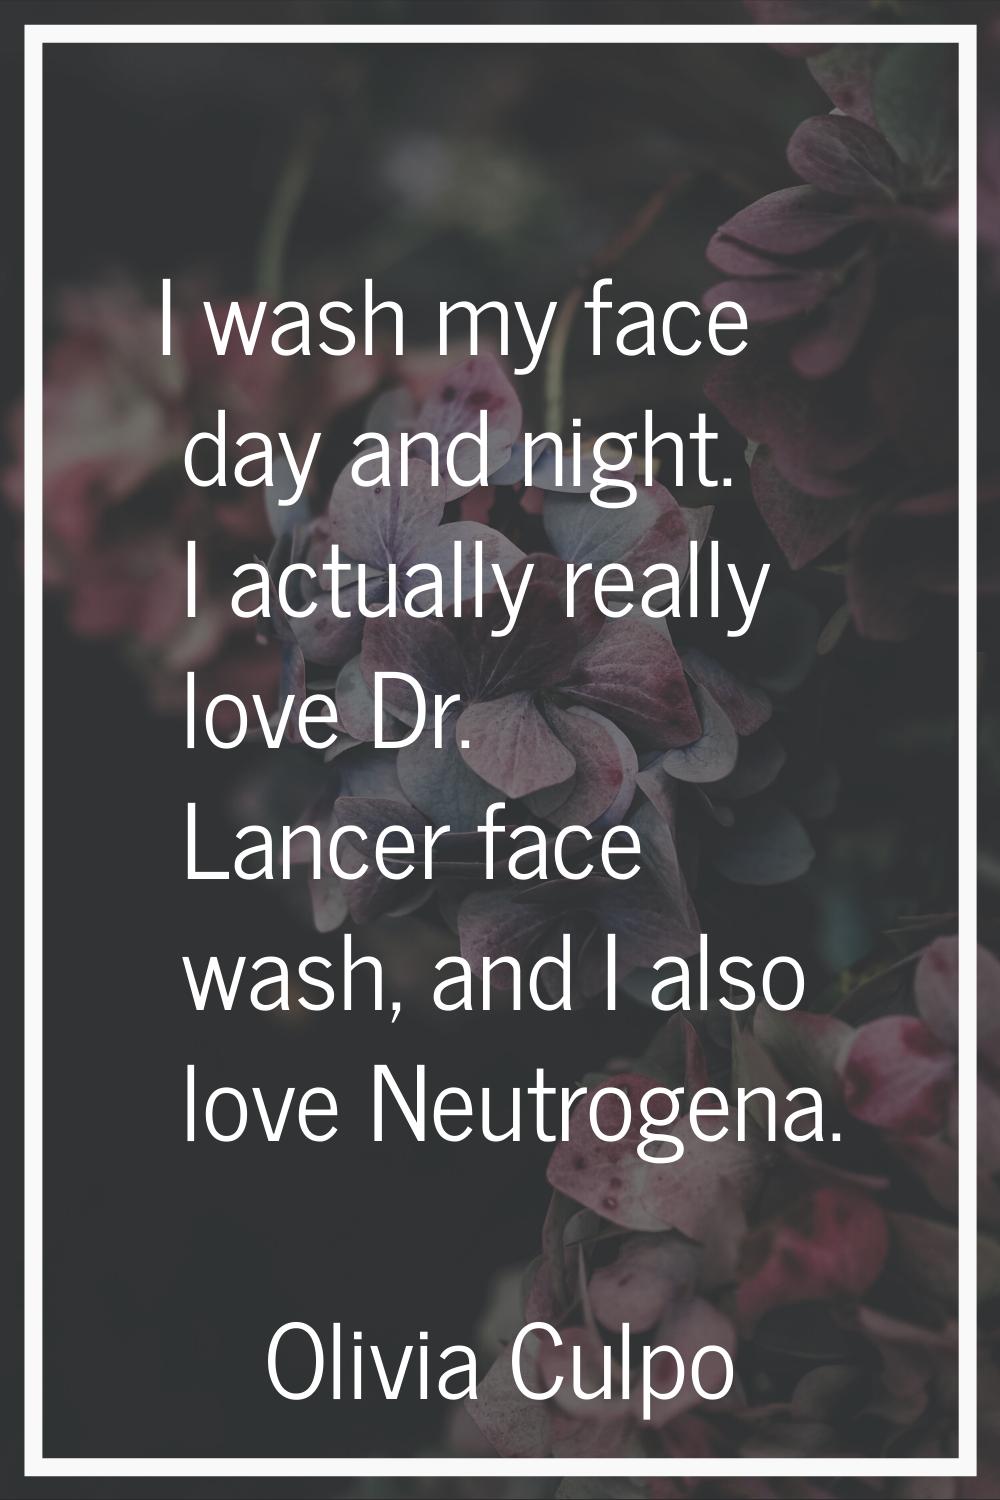 I wash my face day and night. I actually really love Dr. Lancer face wash, and I also love Neutroge